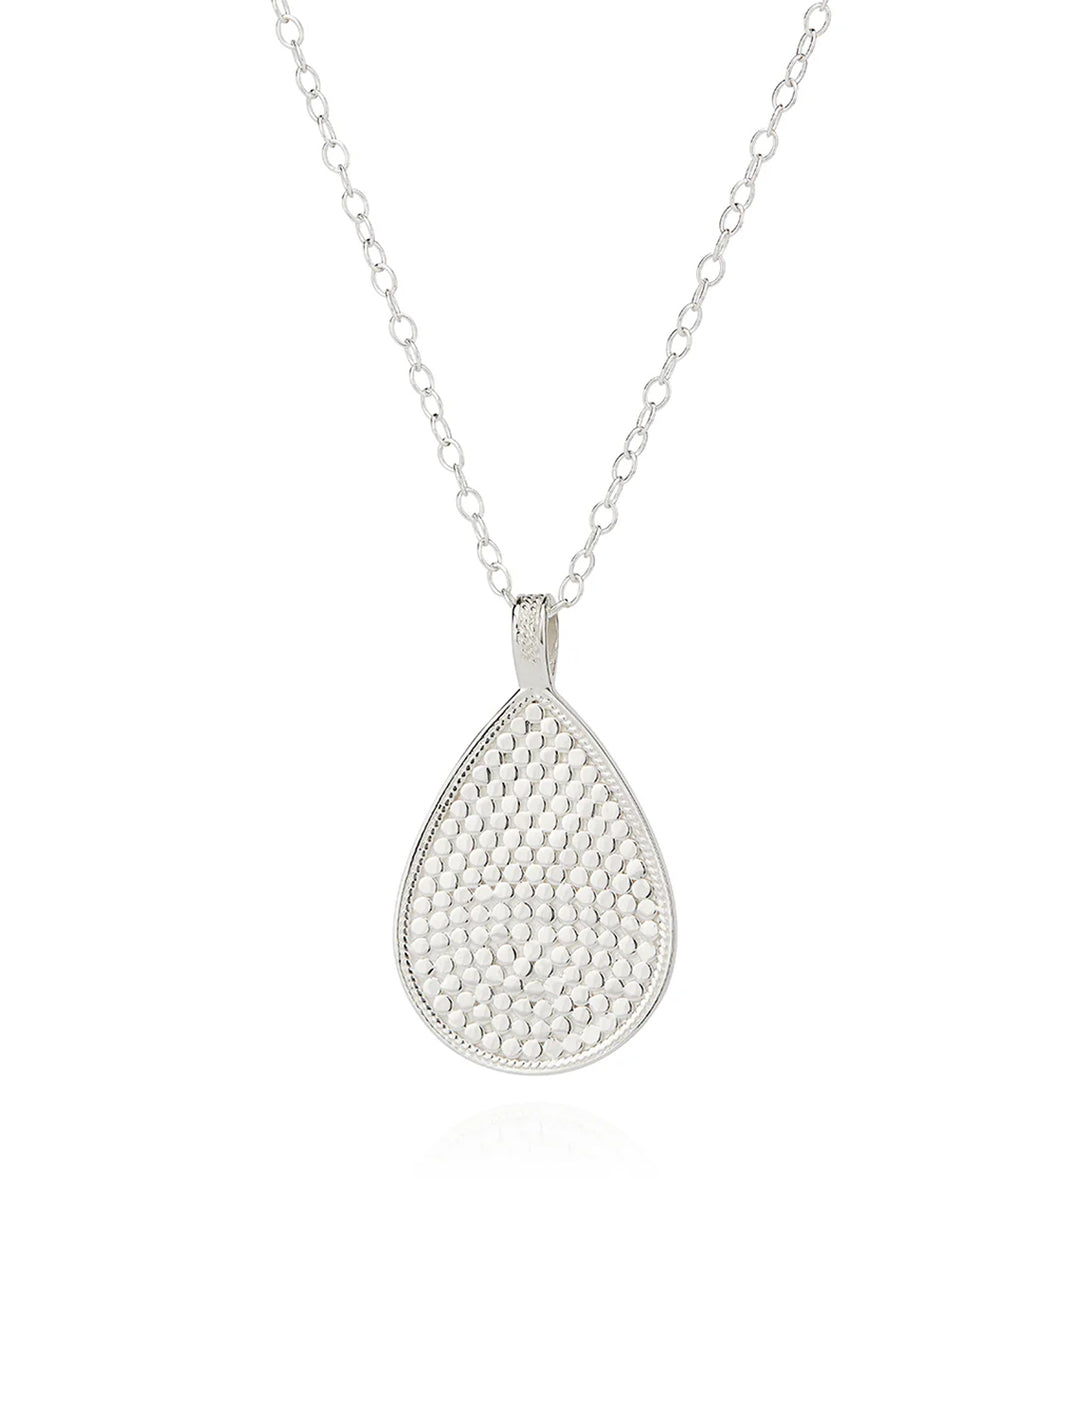 Back view of Anna Beck's classic large teardrop reversible two tone necklace - 30".